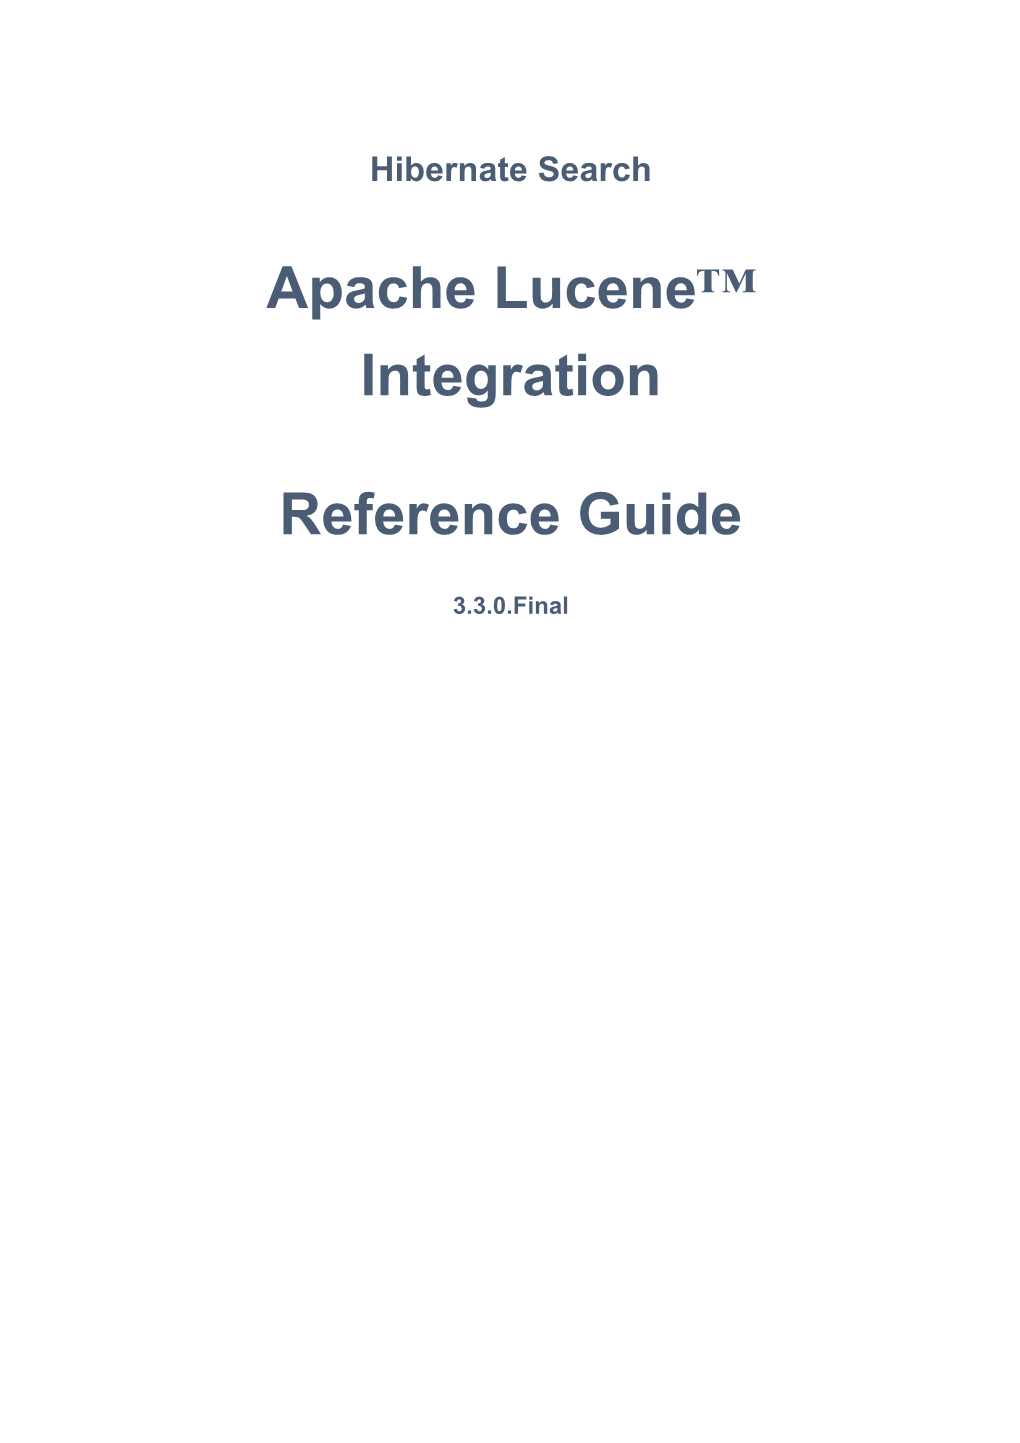 Apache Lucene™ Integration Reference Guide